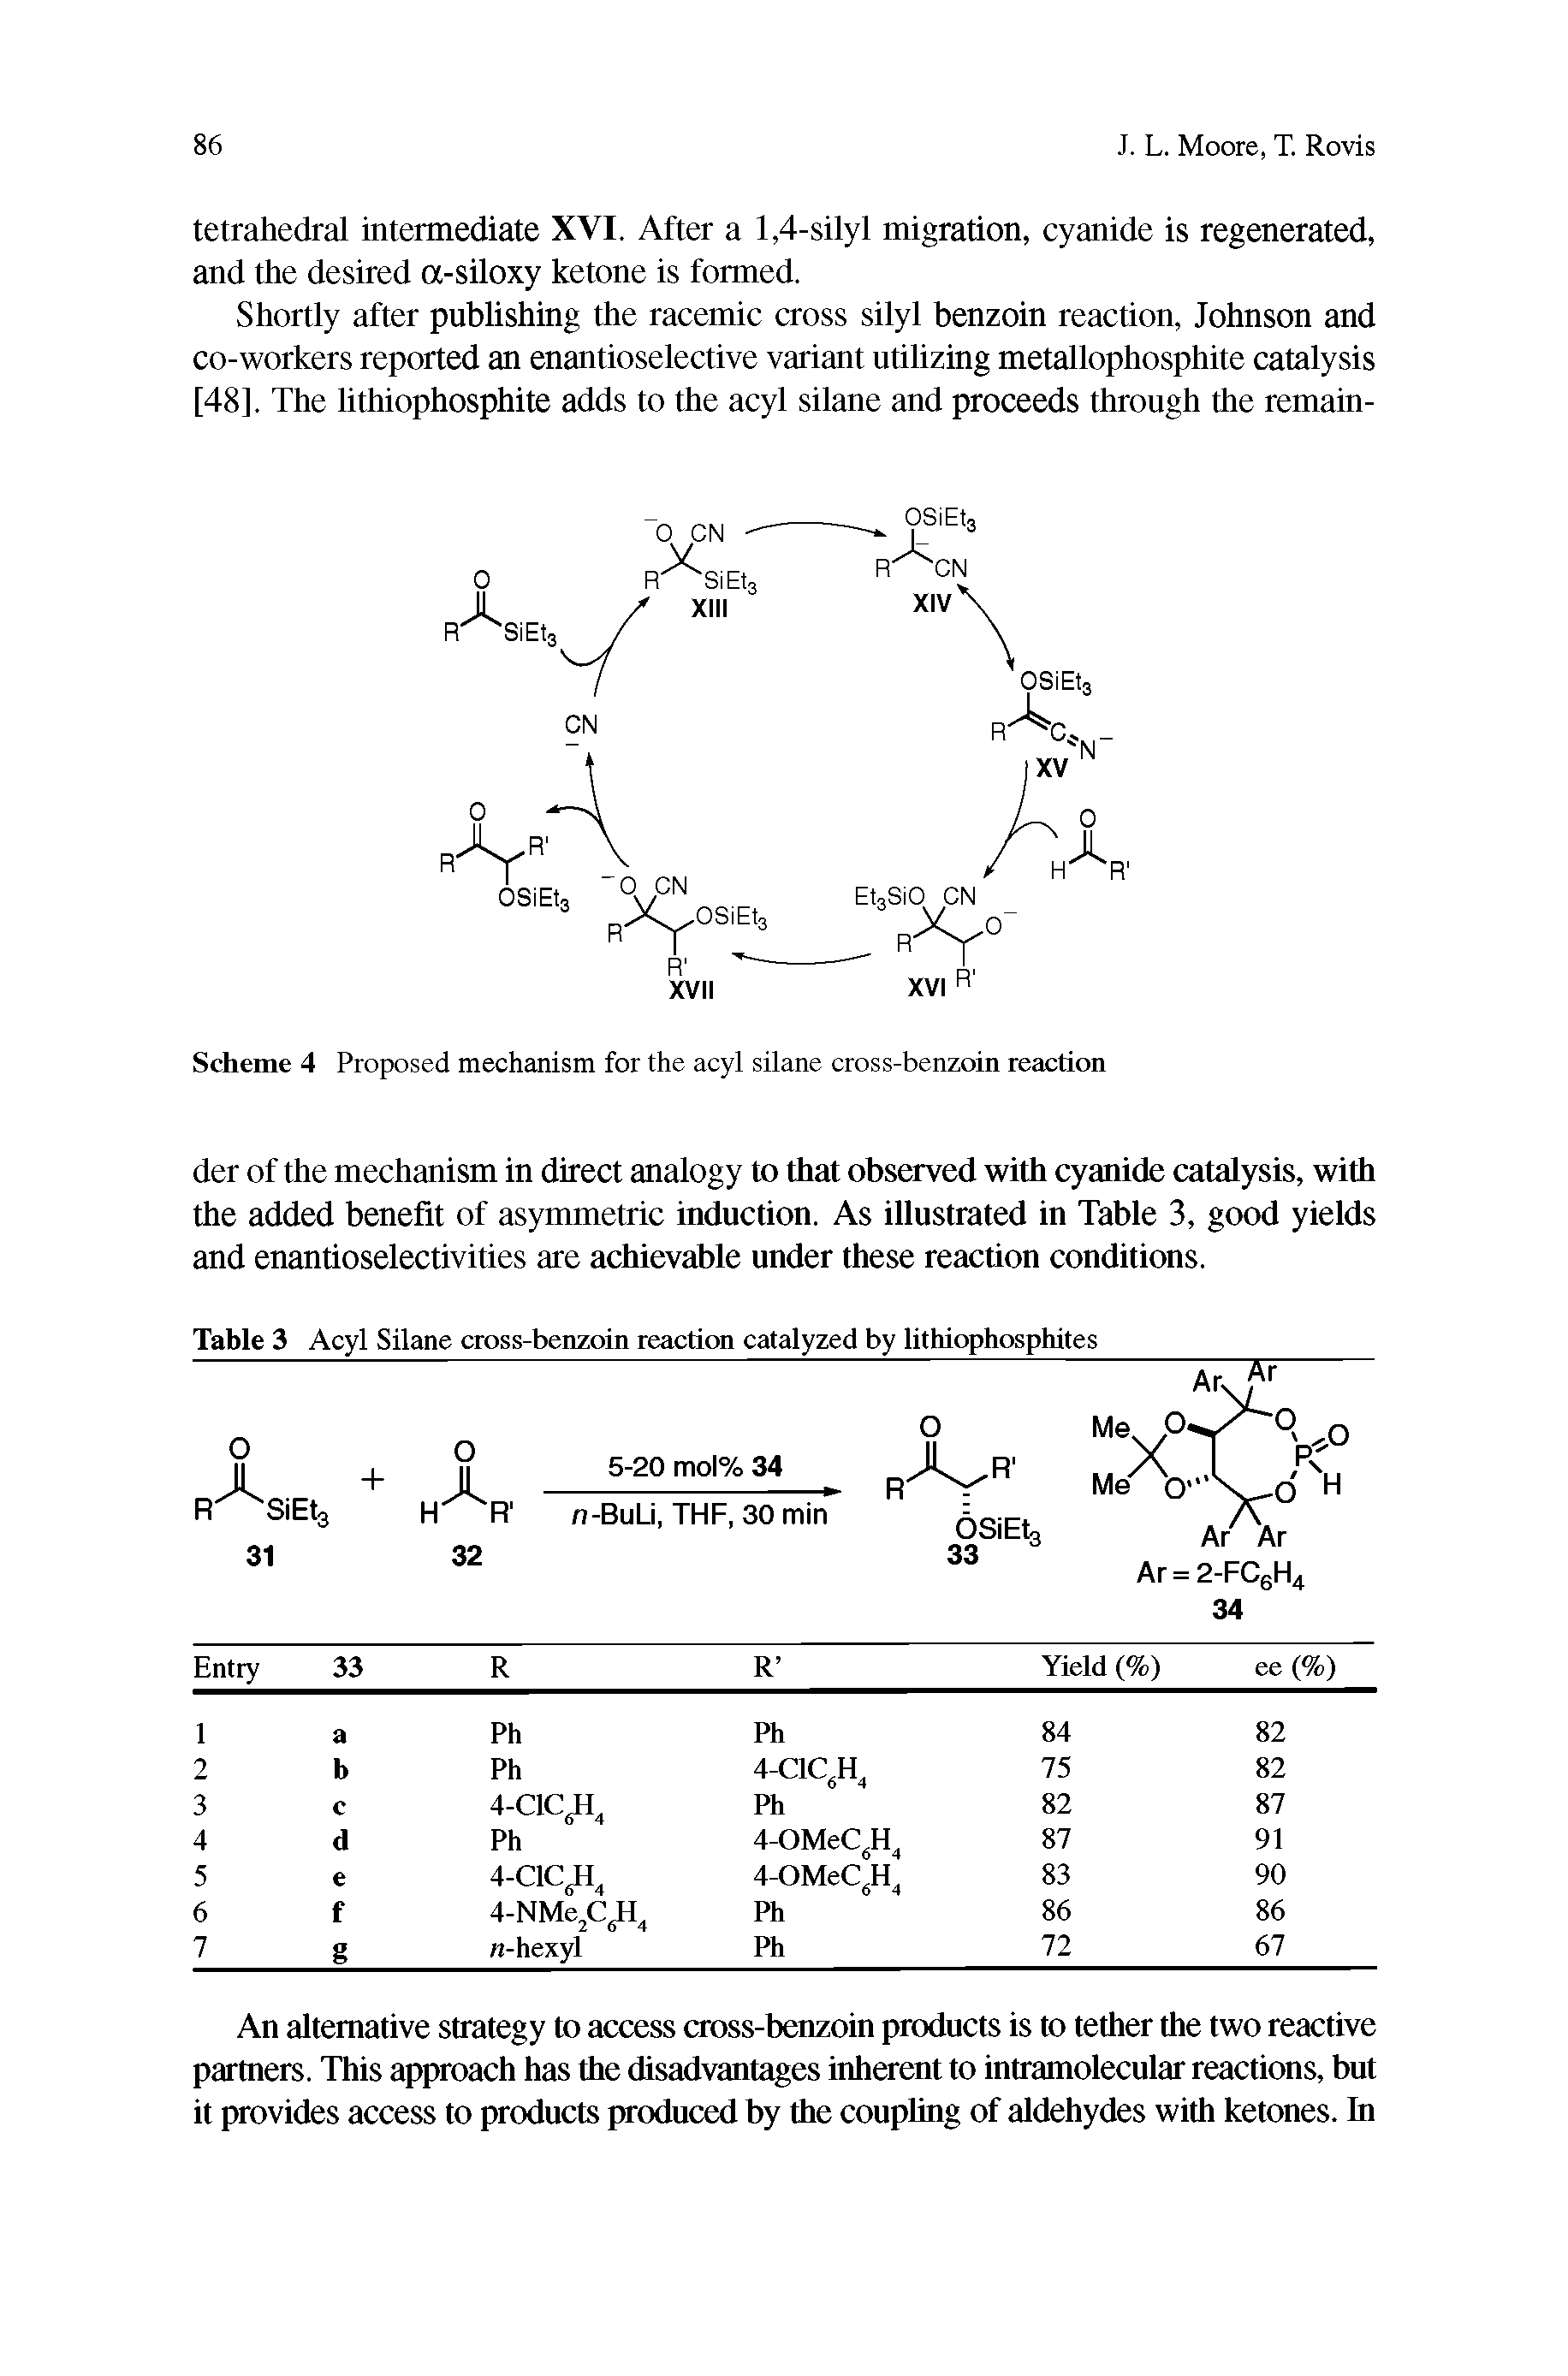 Scheme 4 Proposed mechanism for the acyl silane cross-benzoin reaction...